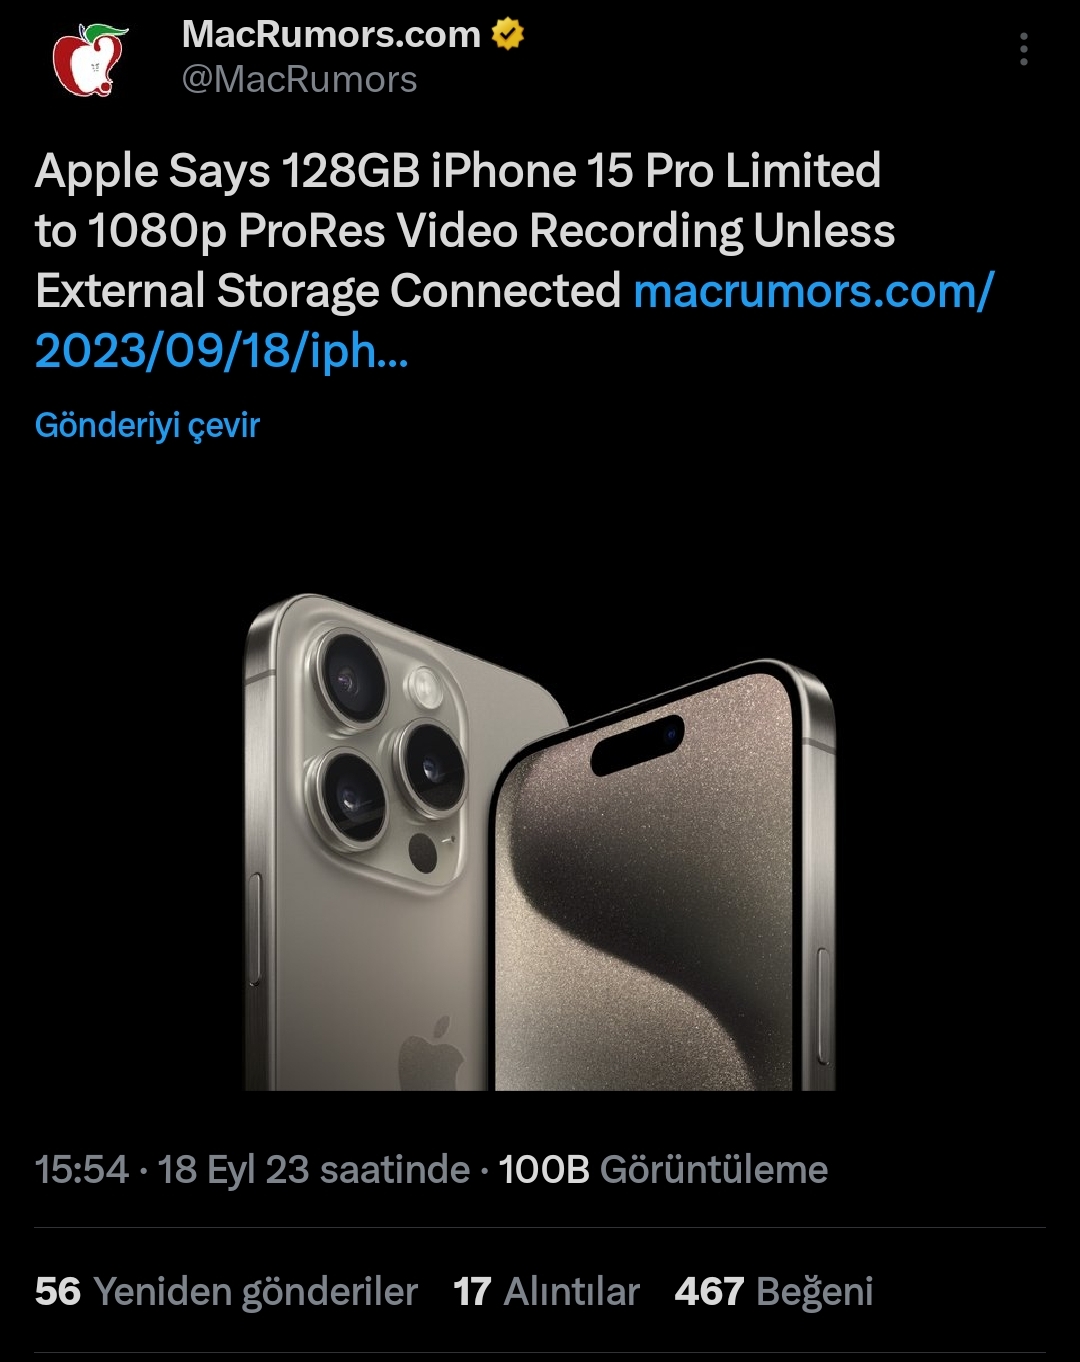 Apple Says 128GB iPhone 15 Pro Limited to 1080p ProRes Video Recording  Unless External Storage Connected - MacRumors